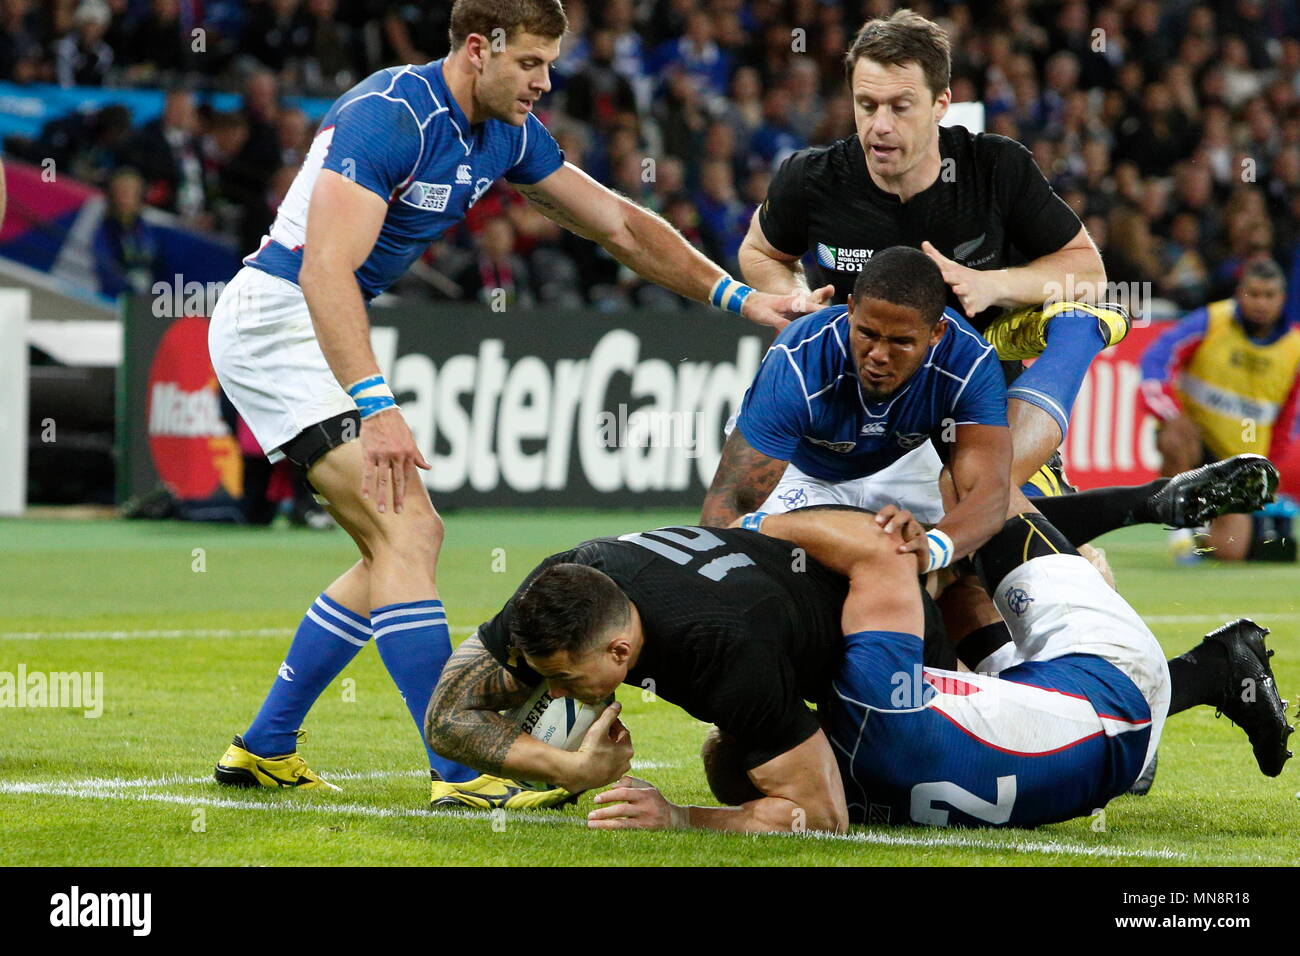 Sonny Bill Williams reaches for the try line for the NZL All Blacks during the IRB RWC 2015 match between New Zealand All Blacks v Namibia- Pool C Match 12 at The Stadium, Queen Elizabeth Olympic Park. London, England. 24 September 2015 Stock Photo